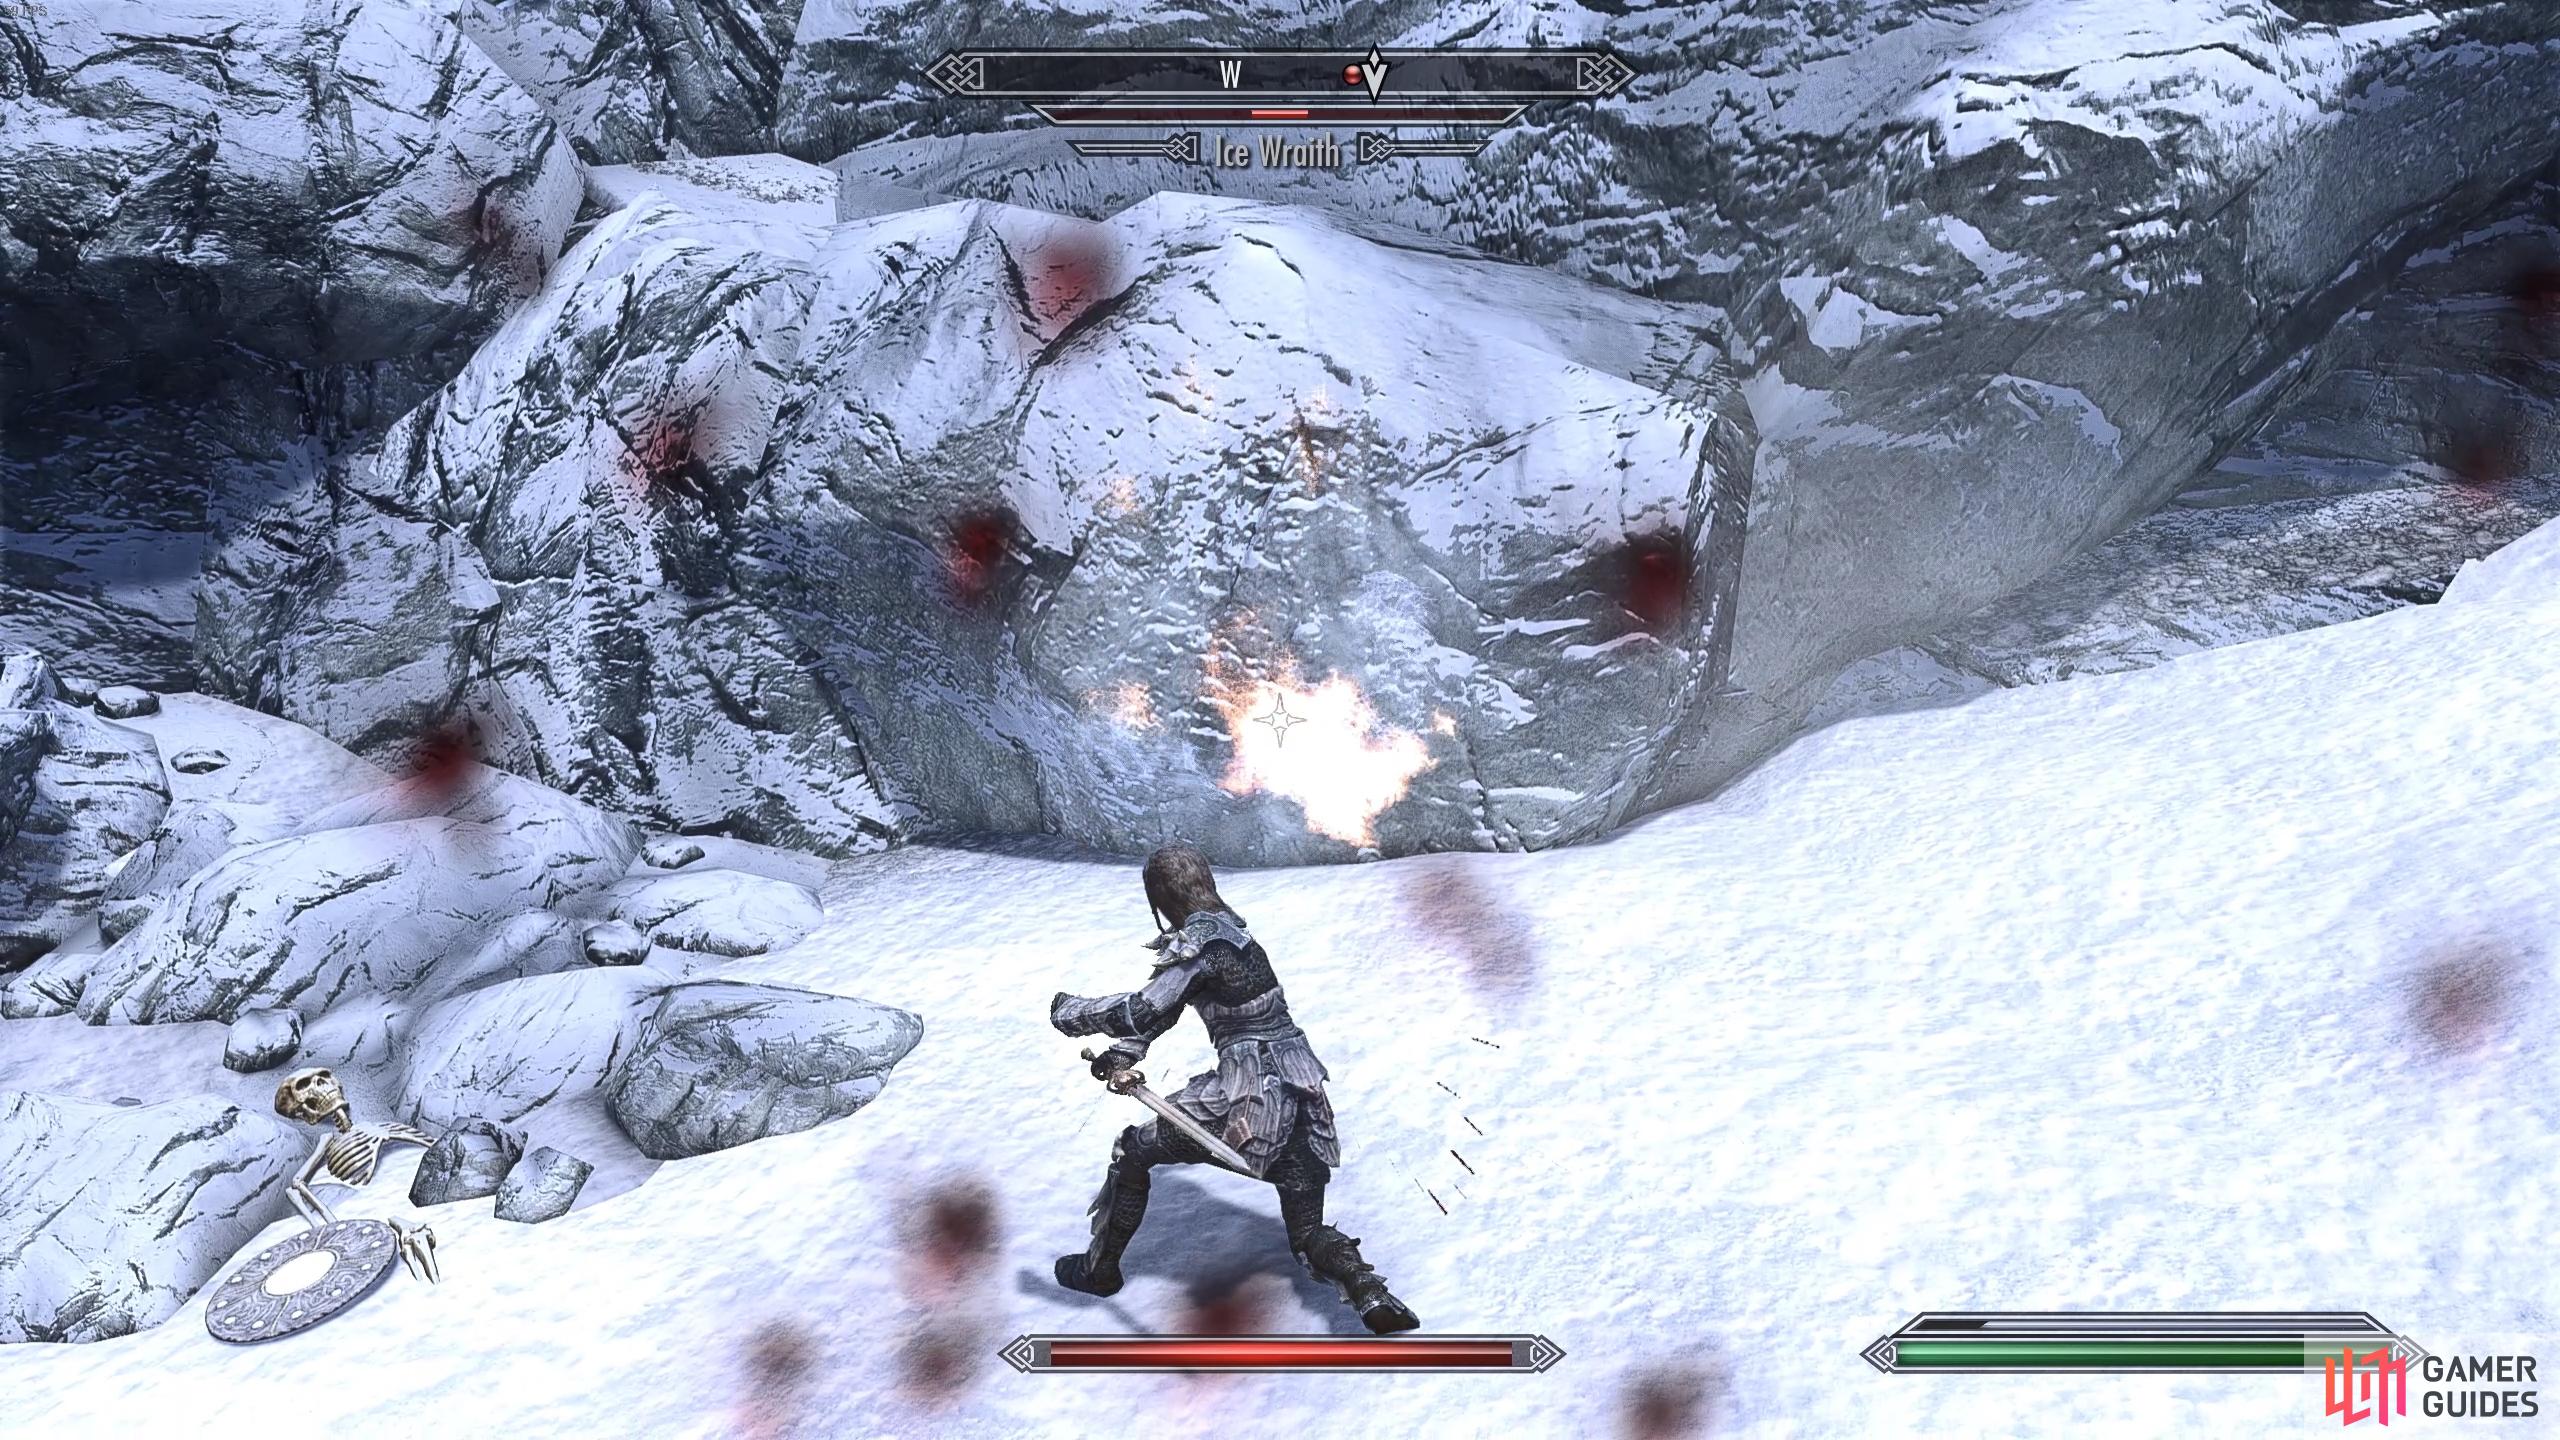 You'll need to defeat some Ice Wraiths as you make your way up the mountain.